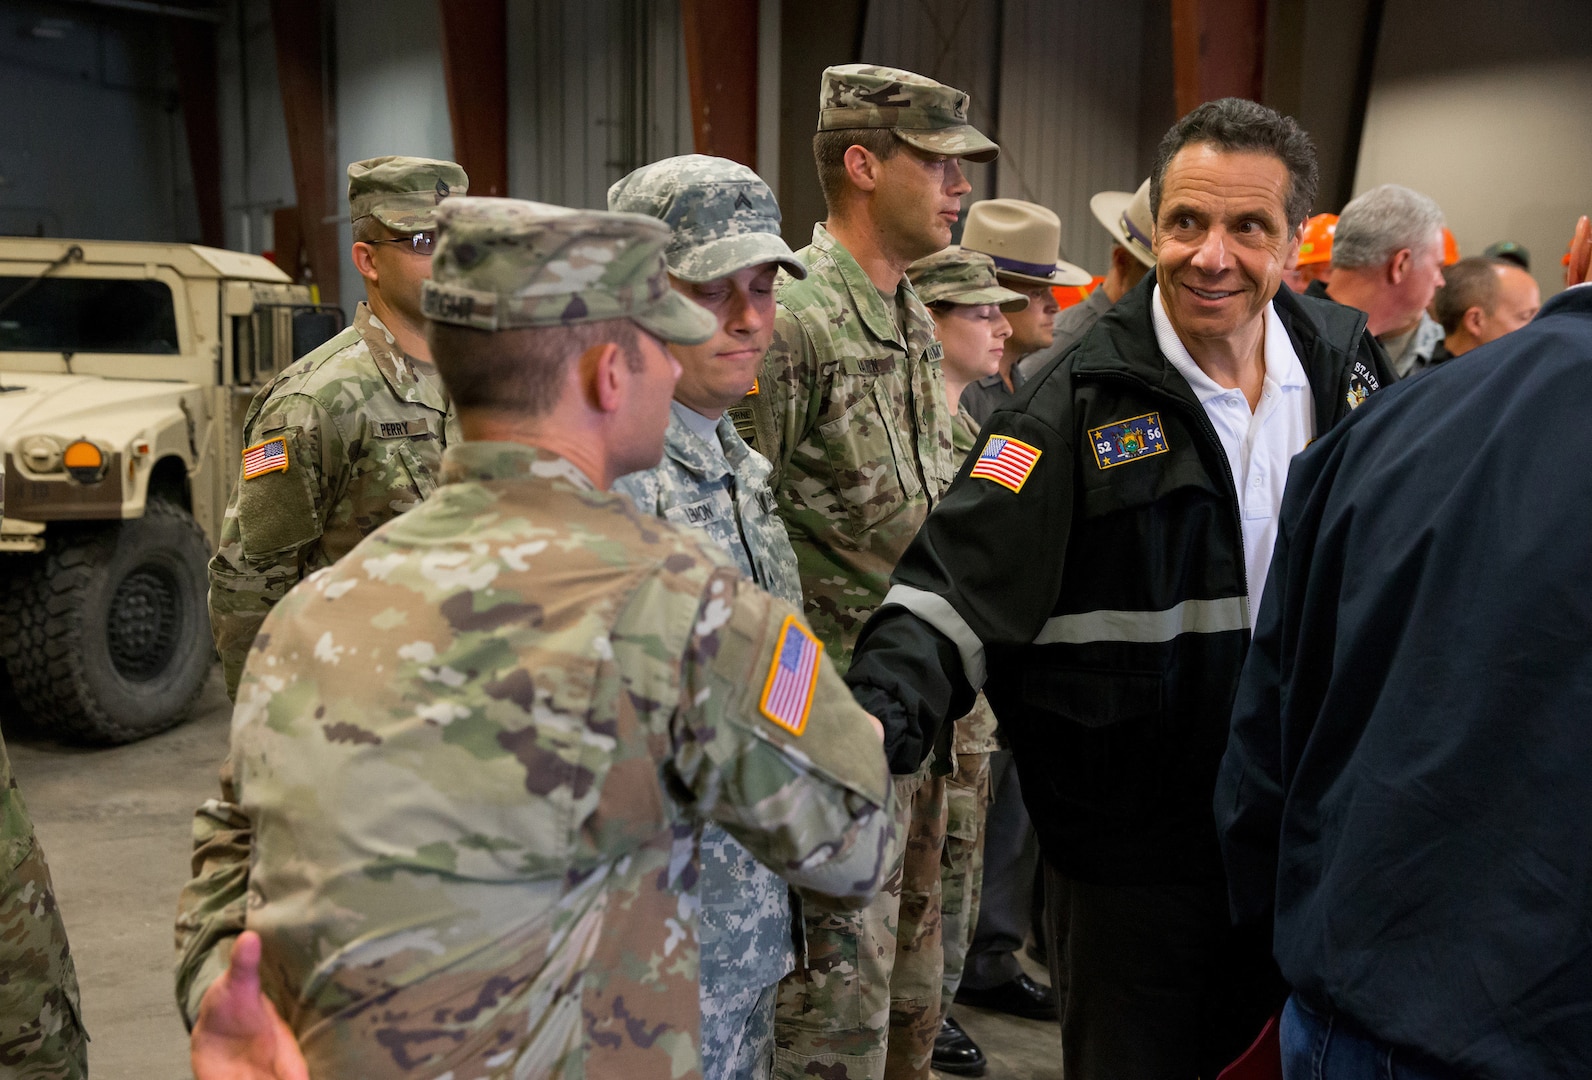 New York Gov. Andrew M. Cuomo greets members of the new York Army National Guard's 204th Engineer Battalion who were on duty to respond to heavy flooding the in New York's Finger Lakes and Southern Tier regions on Tuesday, August 14,2018 in Vestal, N.Y. The governor declared a disaster area in 14 counties and mobilized 200 New York National Guard Airmen and Soldiers as part of the state response.